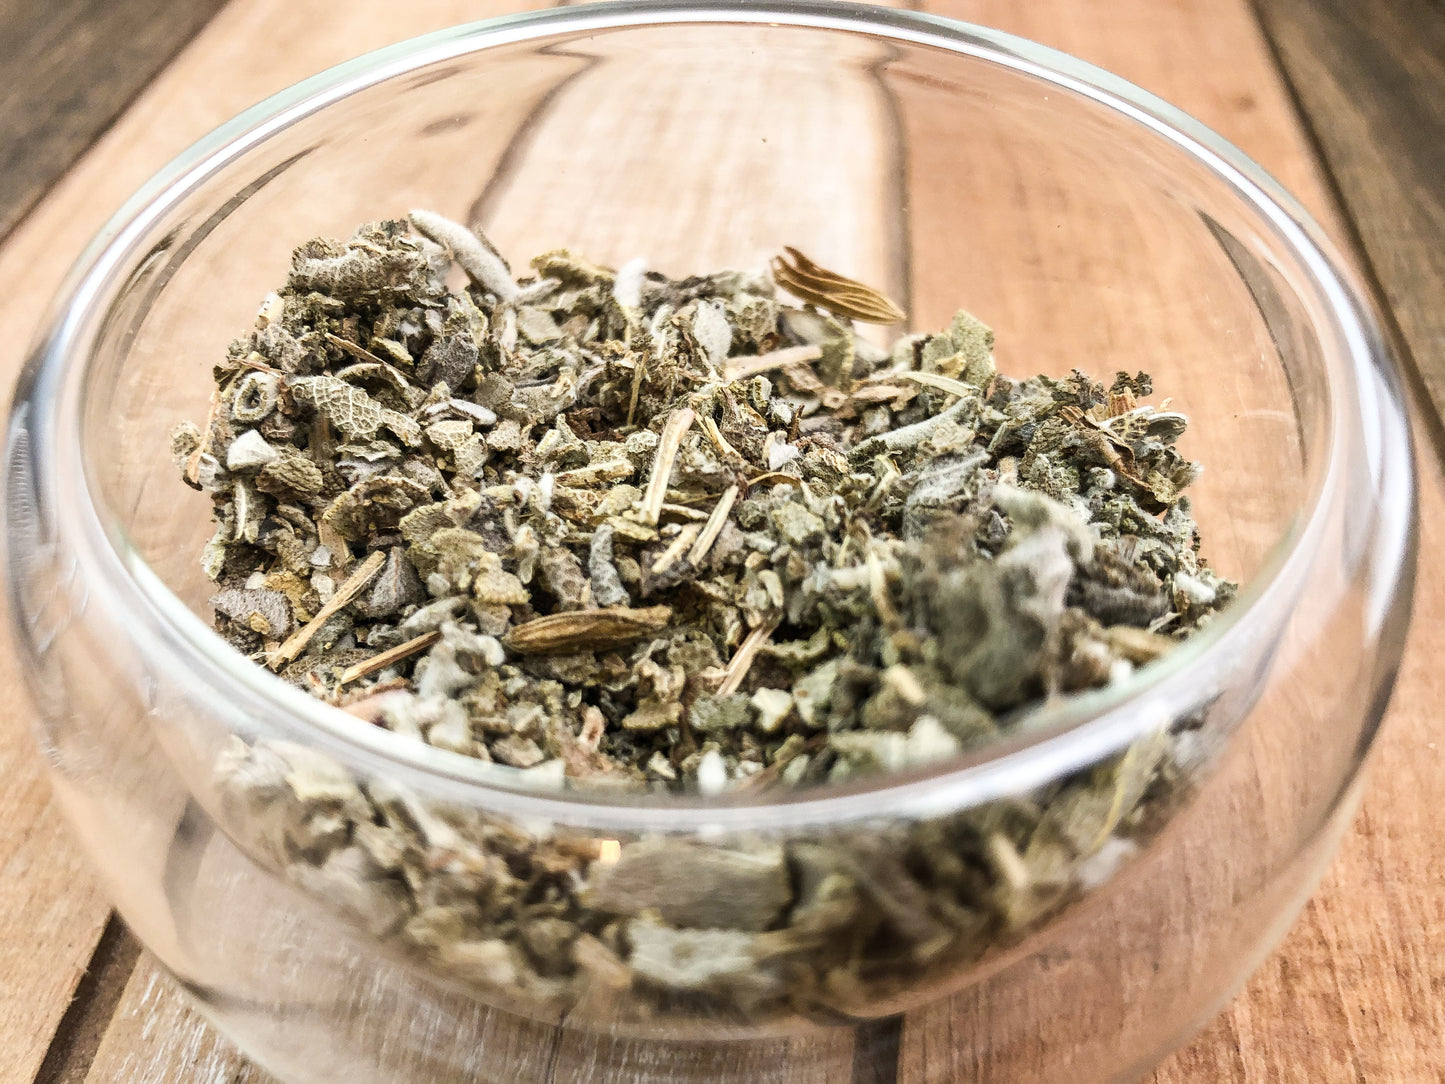 upclose image of dried sage in a small clear glass cup with wooden table as background 